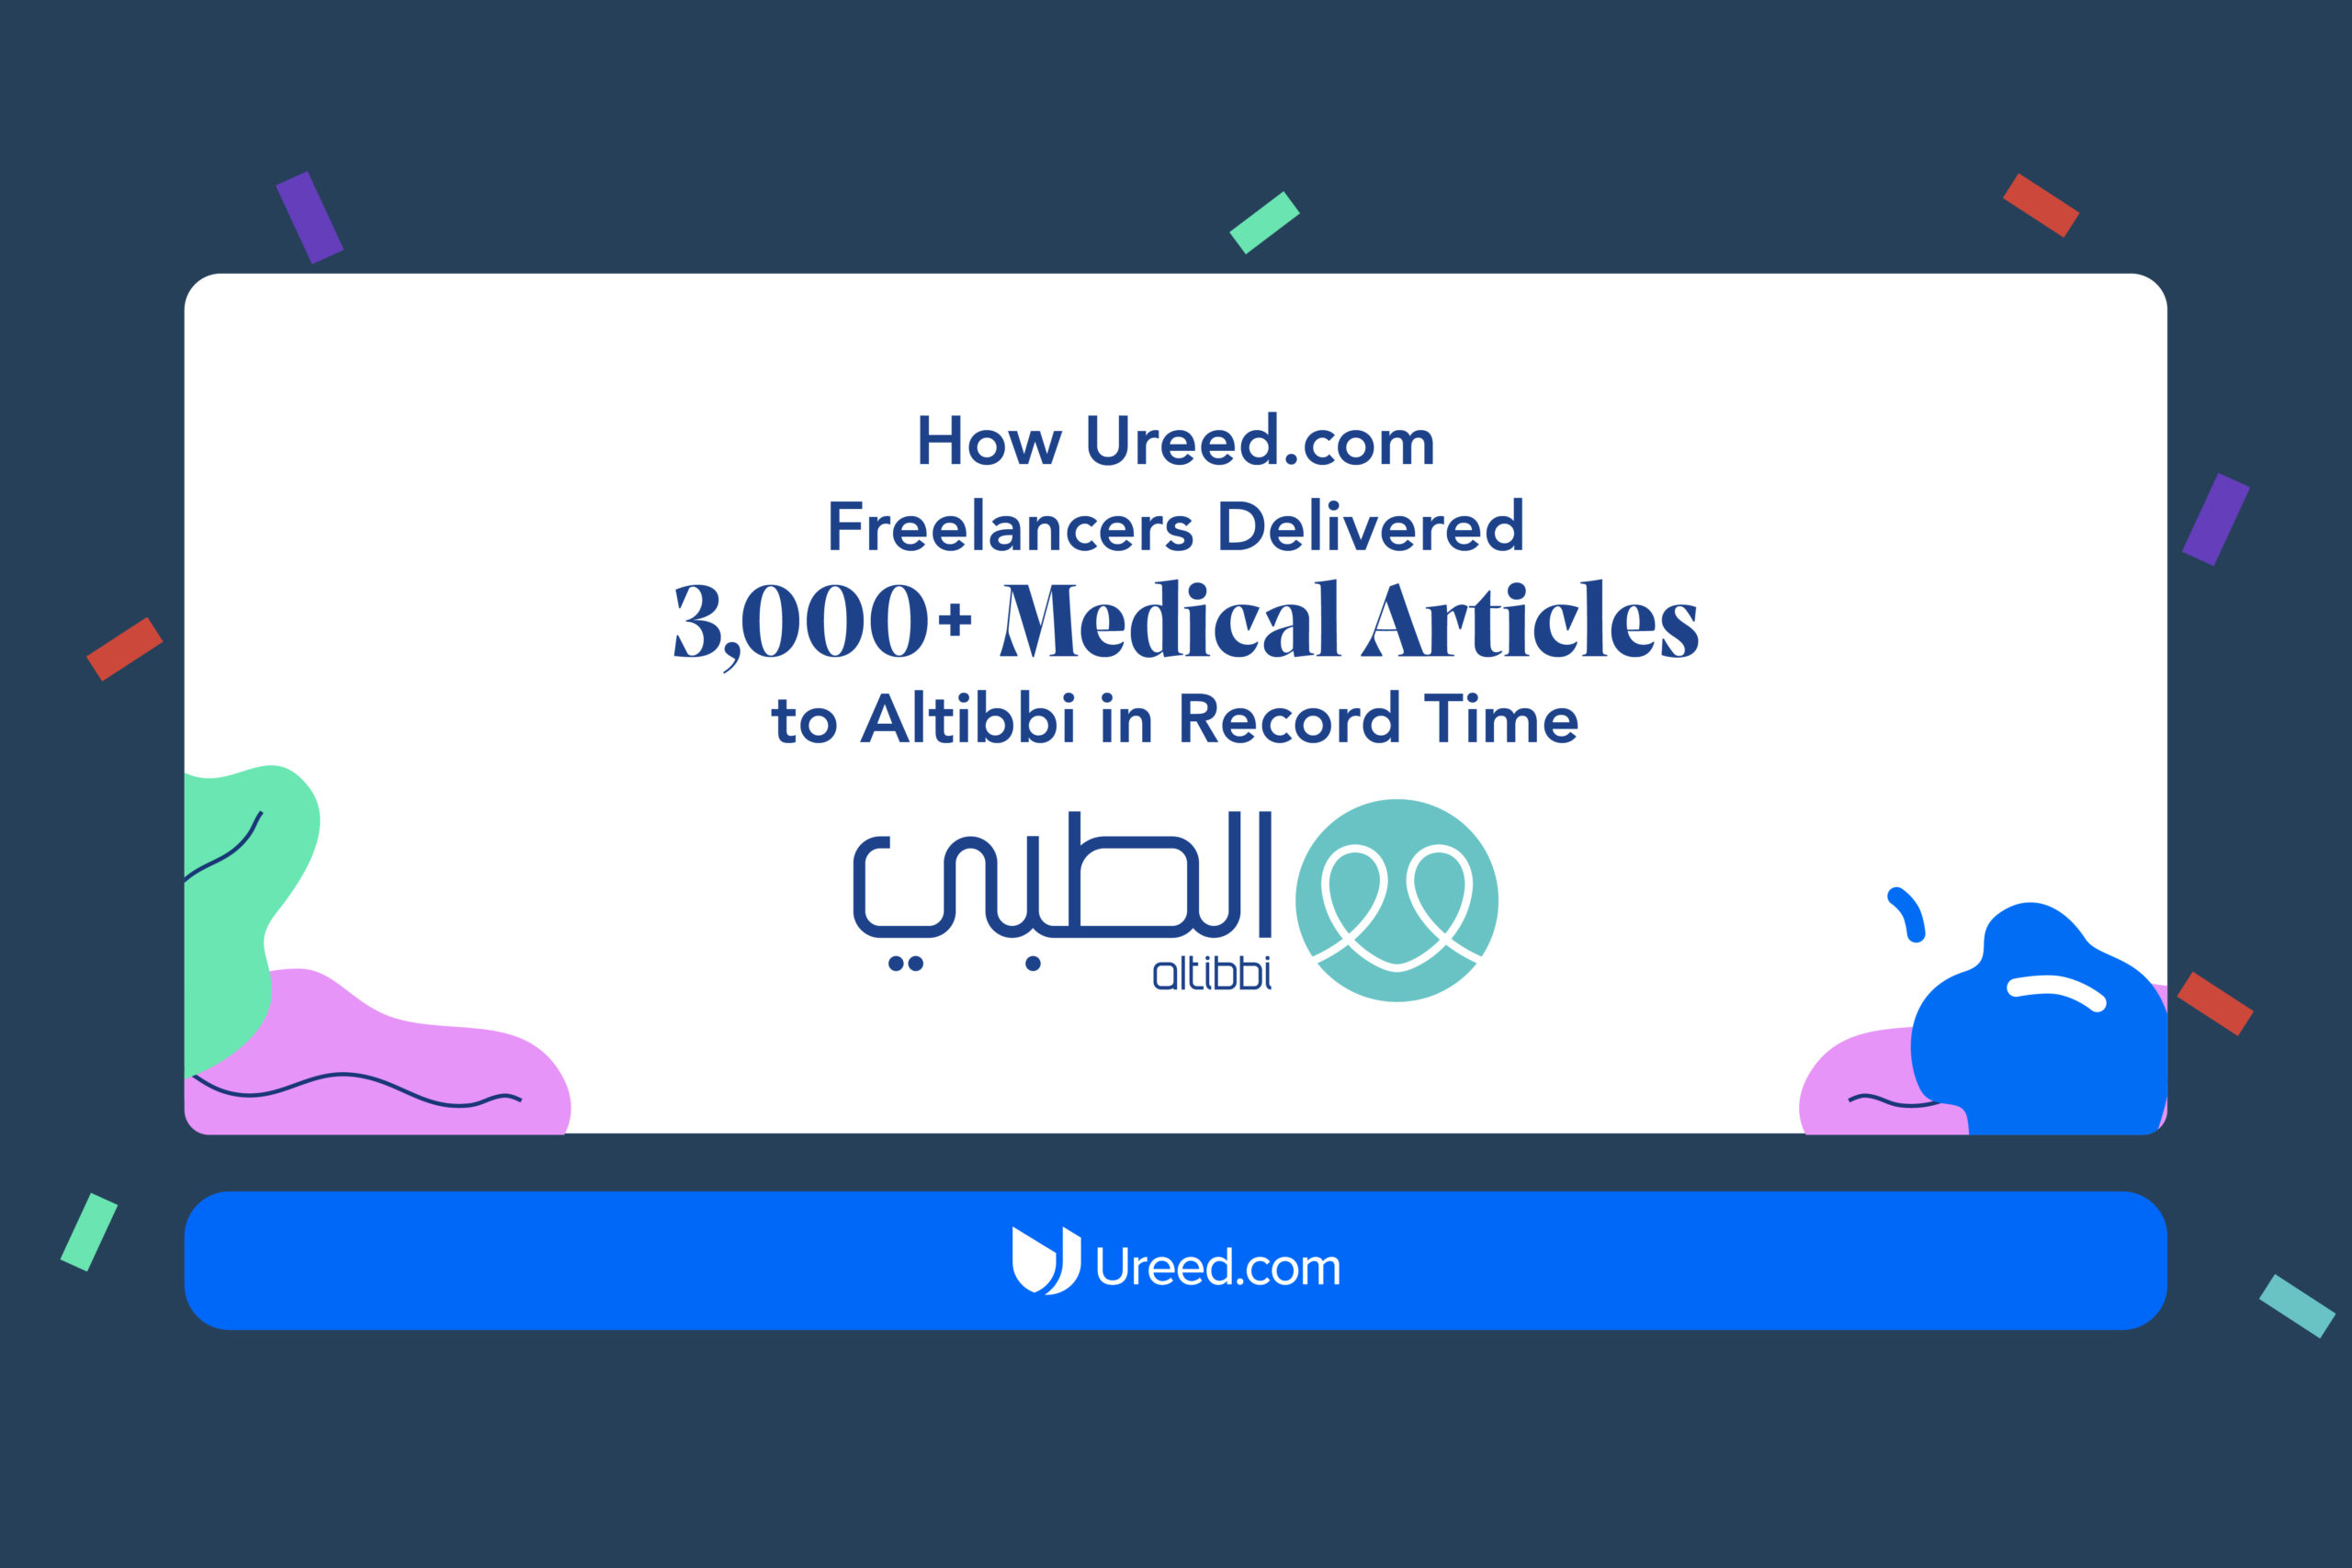 How Ureed.com Freelancers Delivered 3,000+ Medical Articles to Altibbi in Record Time